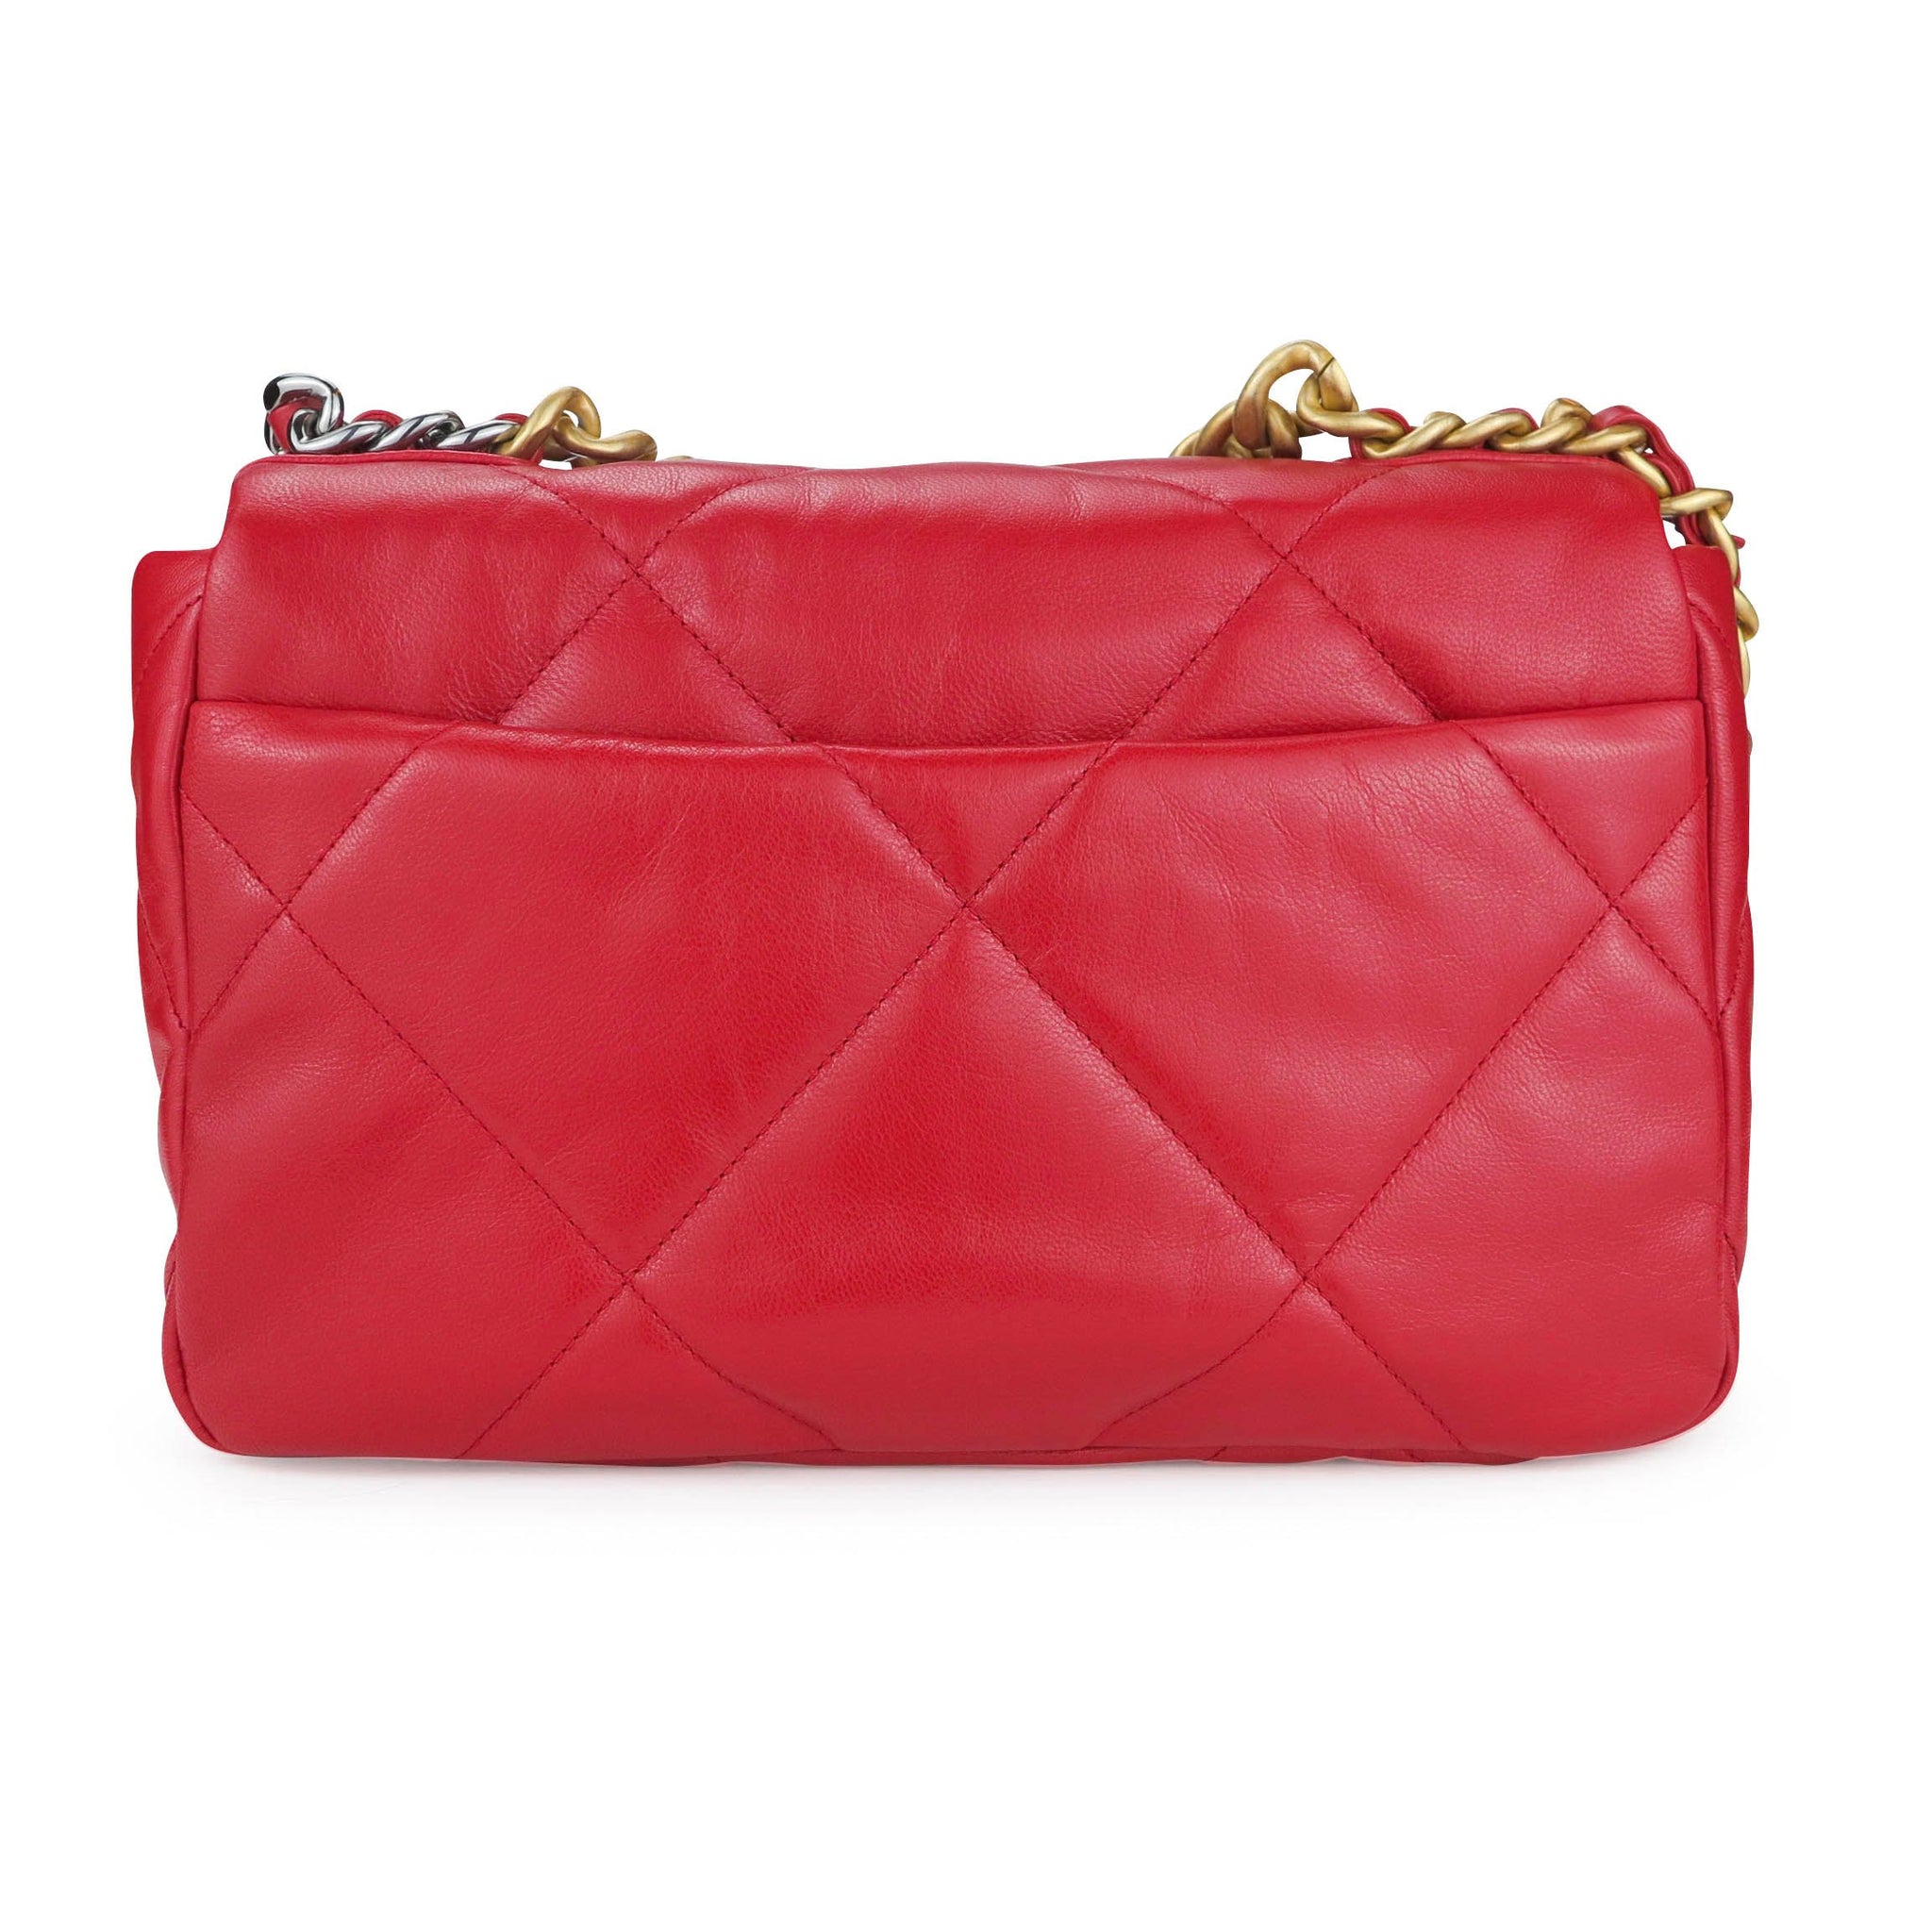 CHANEL 19 Small Quilted Lambskin Leather Flap Shoulder Bag Red